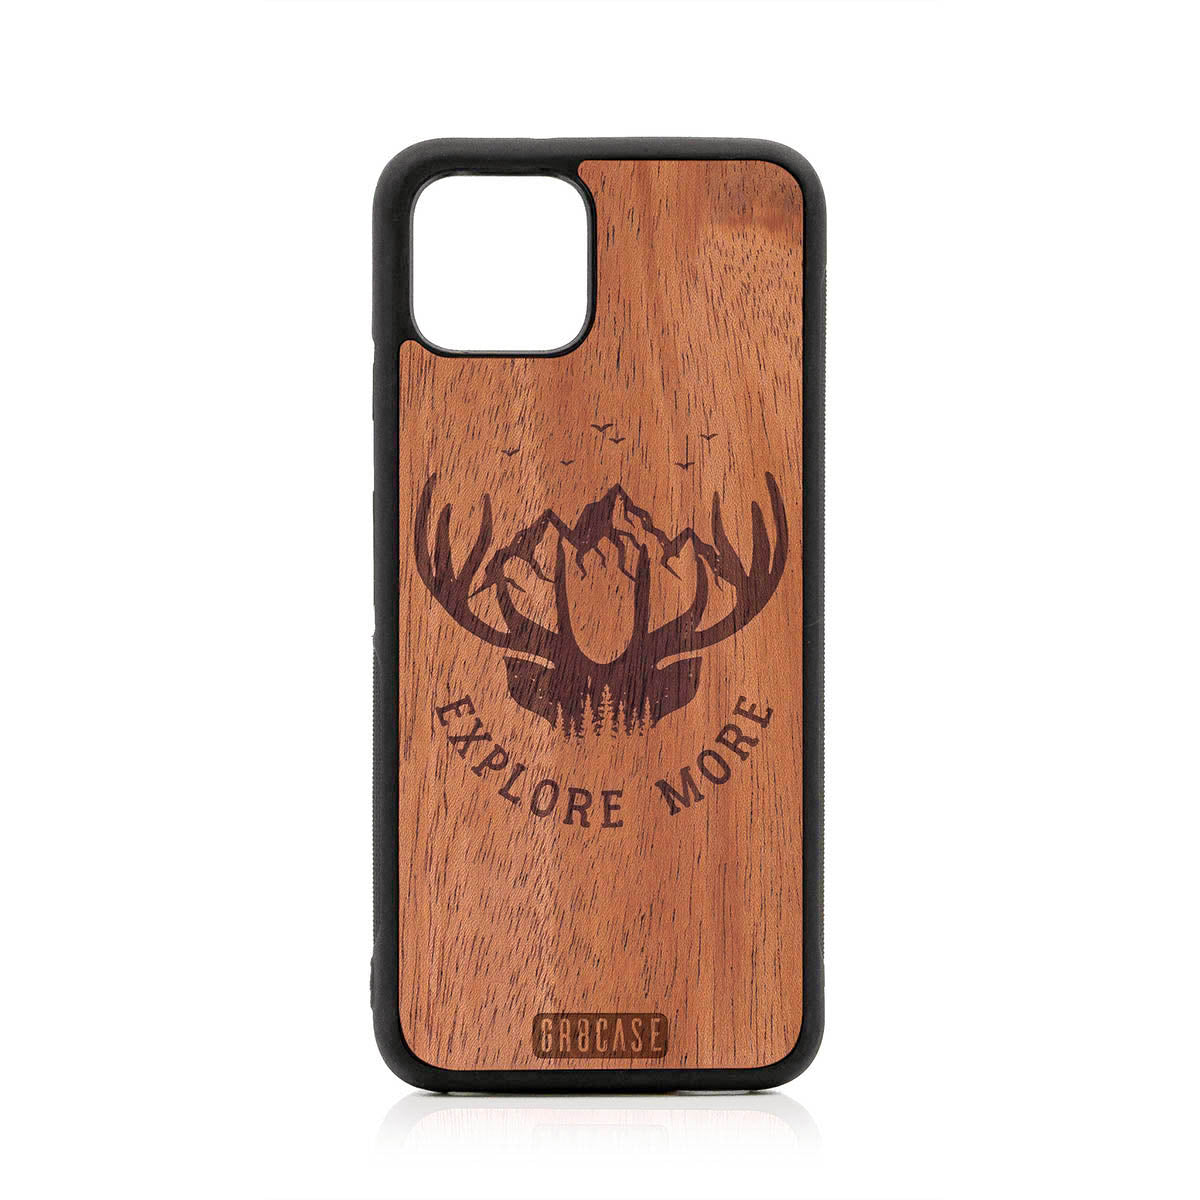 Explore More (Forest, Mountains & Antlers) Design Wood Case For Google Pixel 4 by GR8CASE